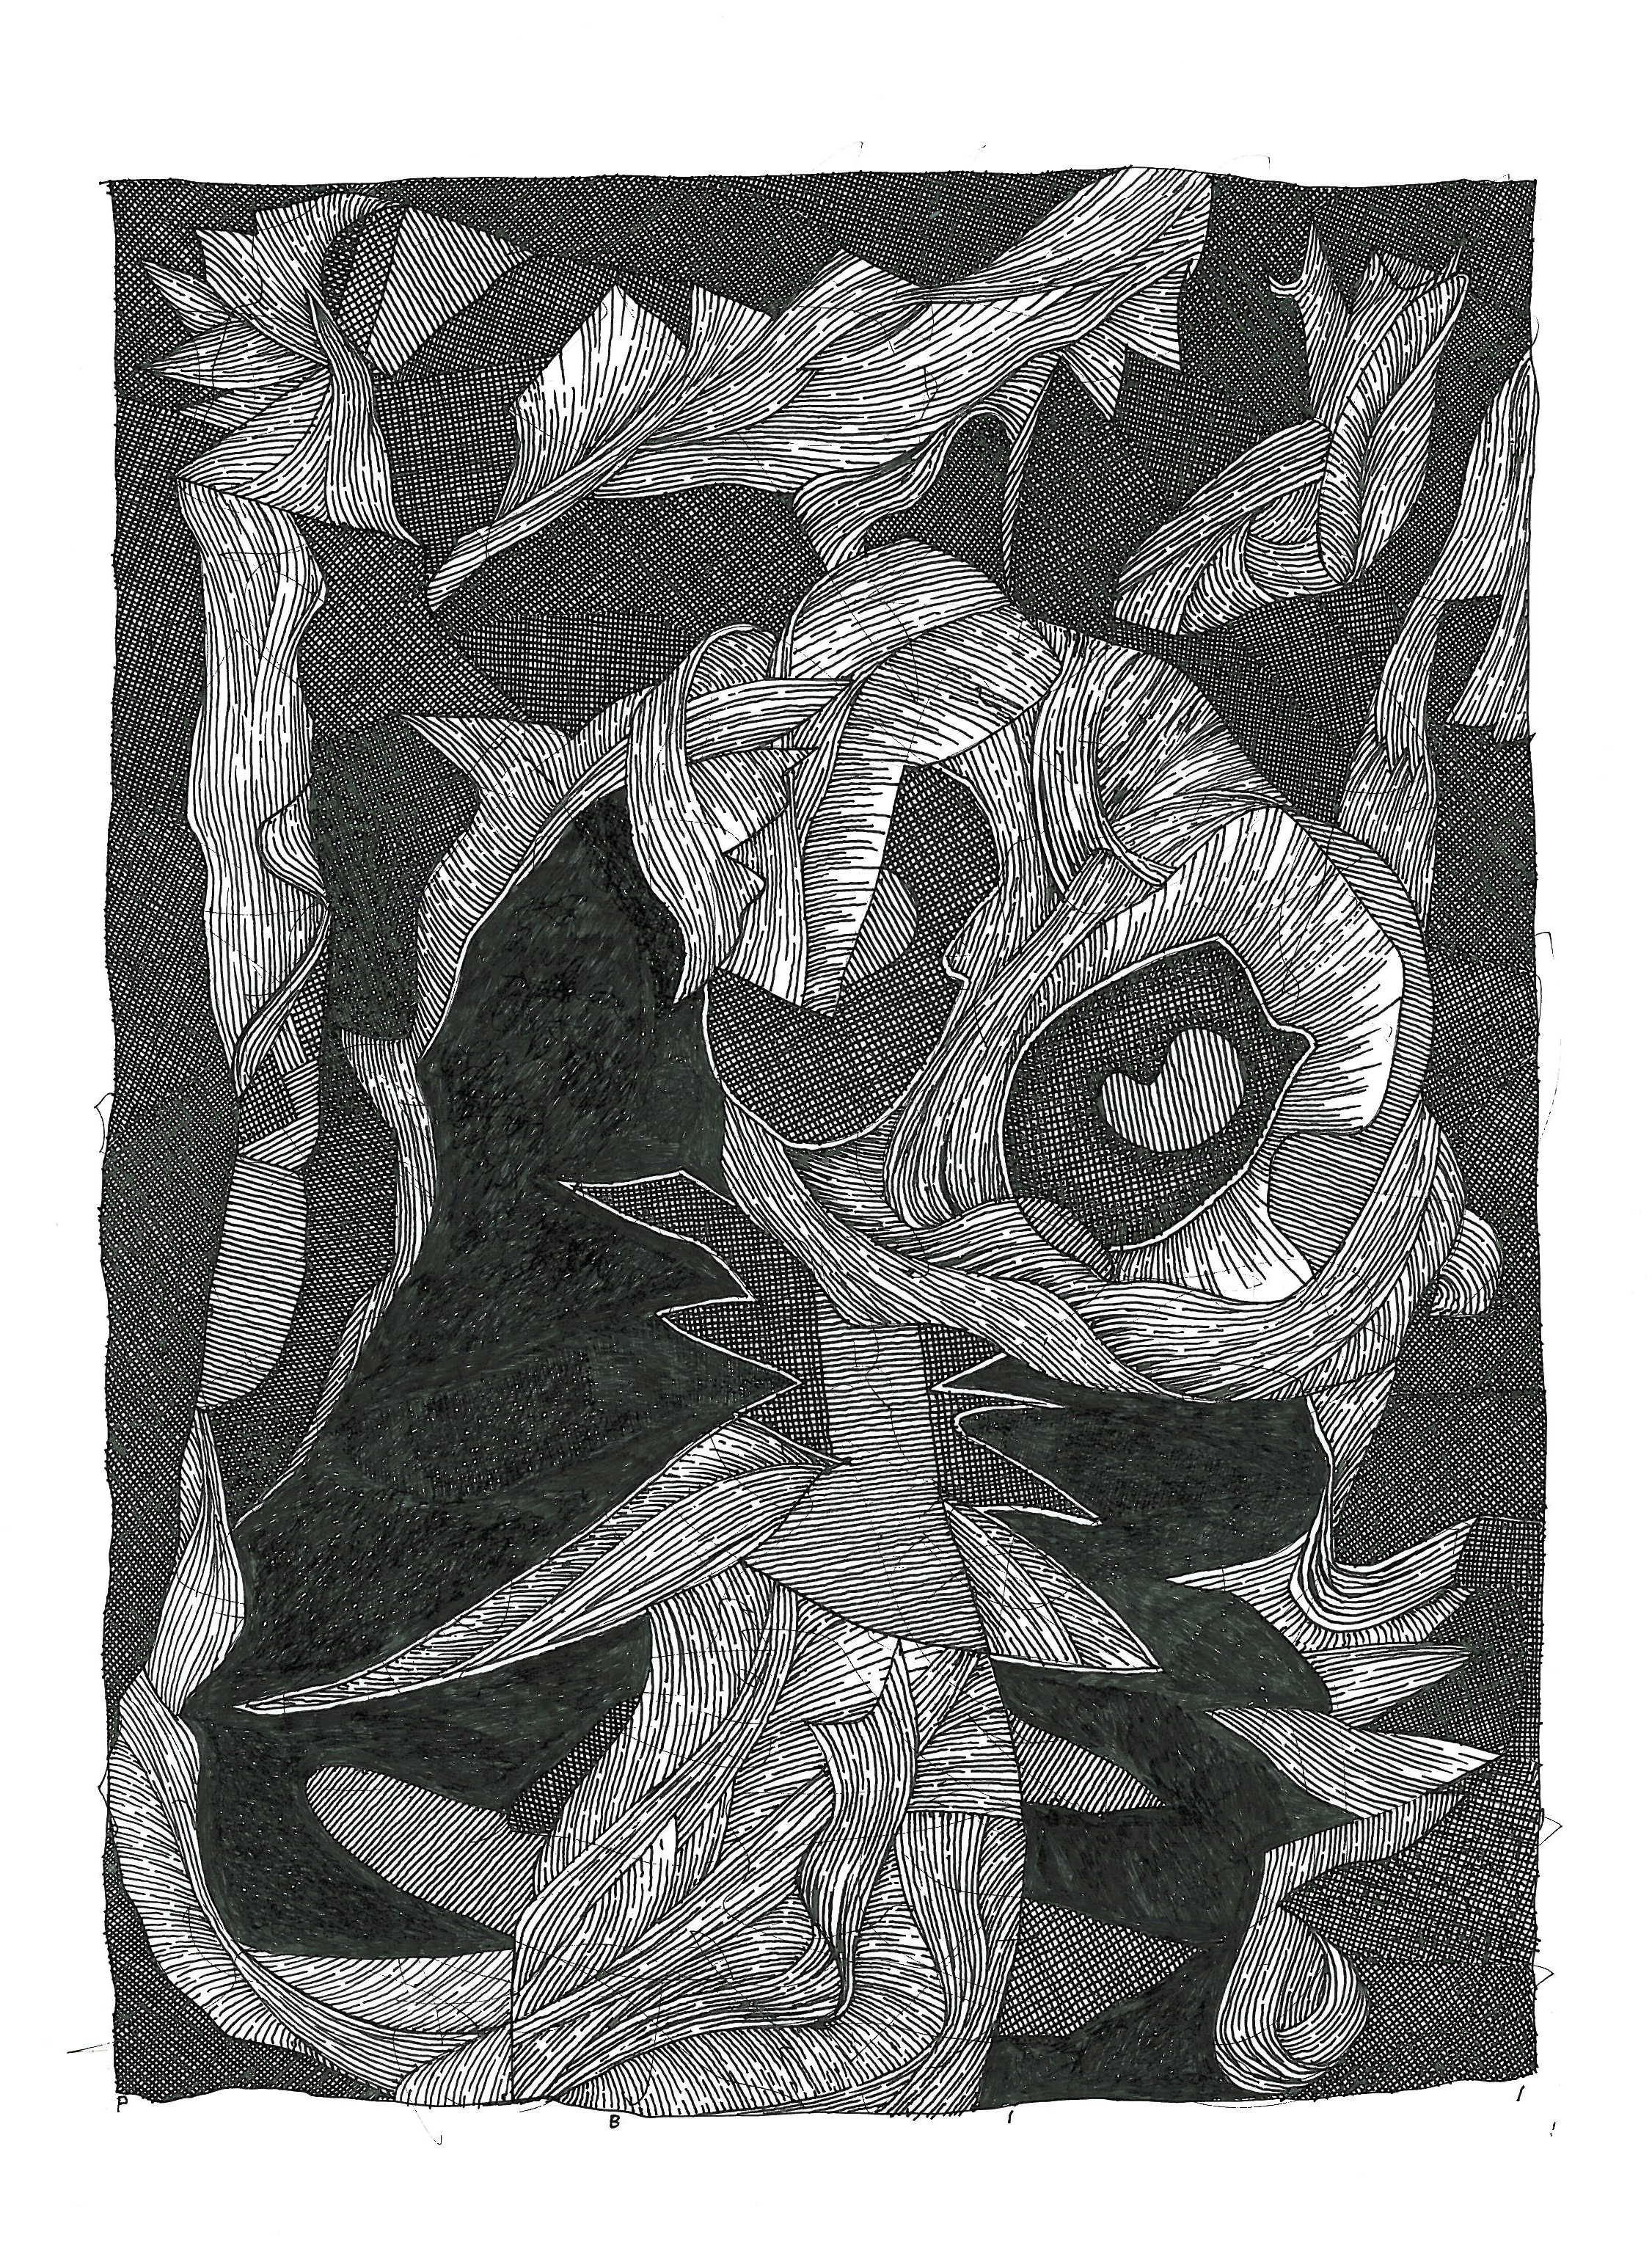  Pen and Ink - 6.5" x 9" - 2011 